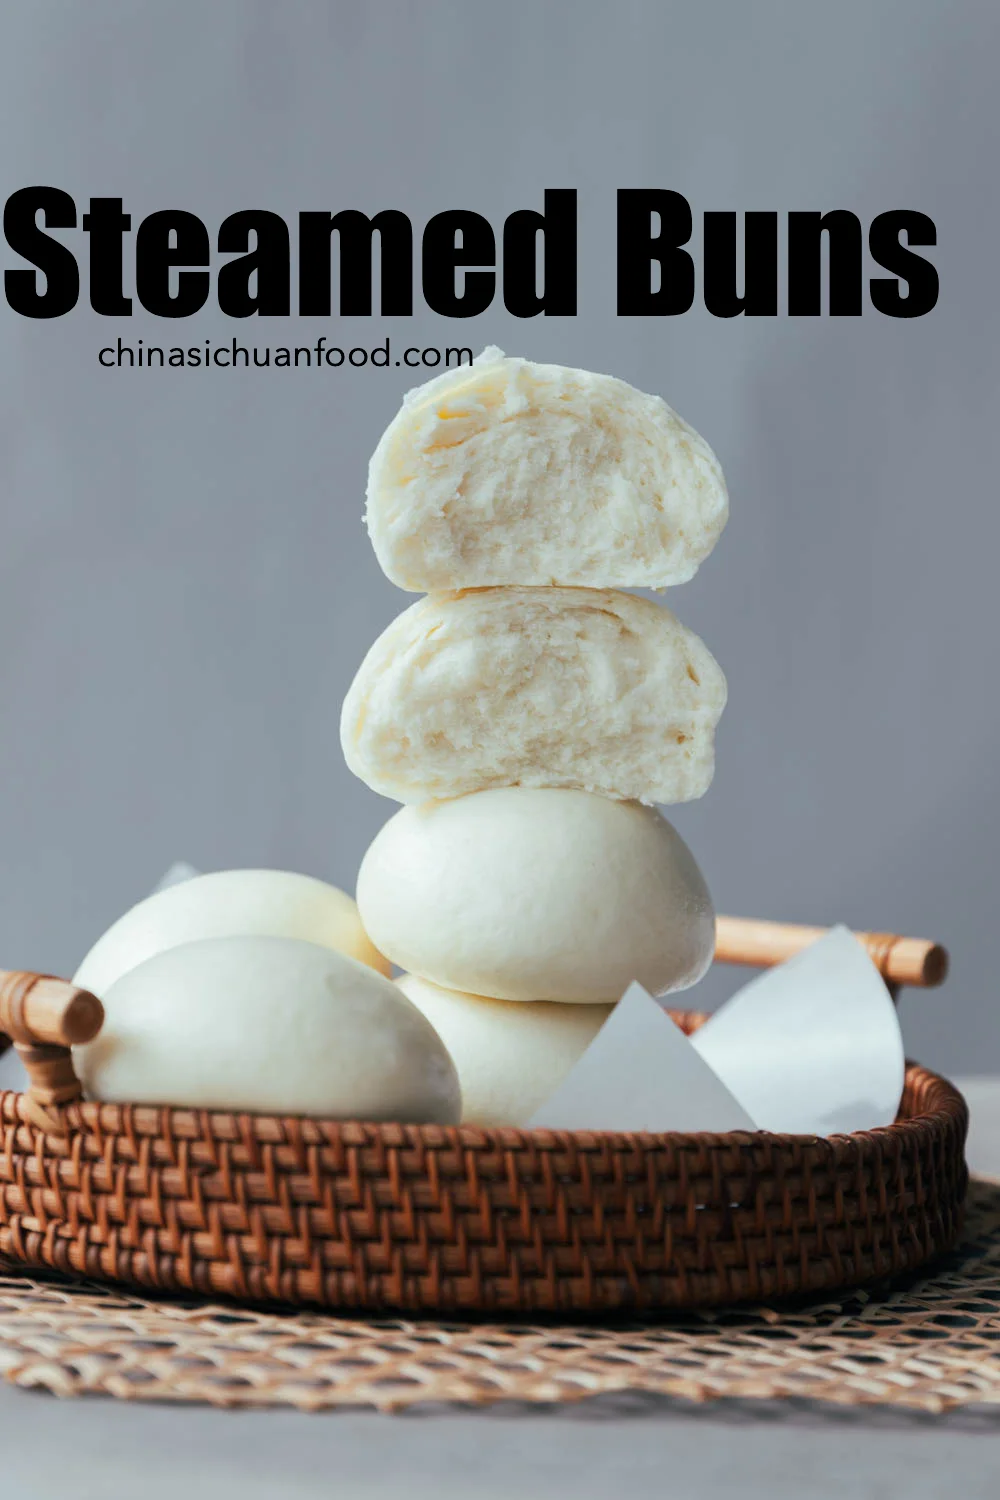 traditional round buns|chinasichuanfood.com